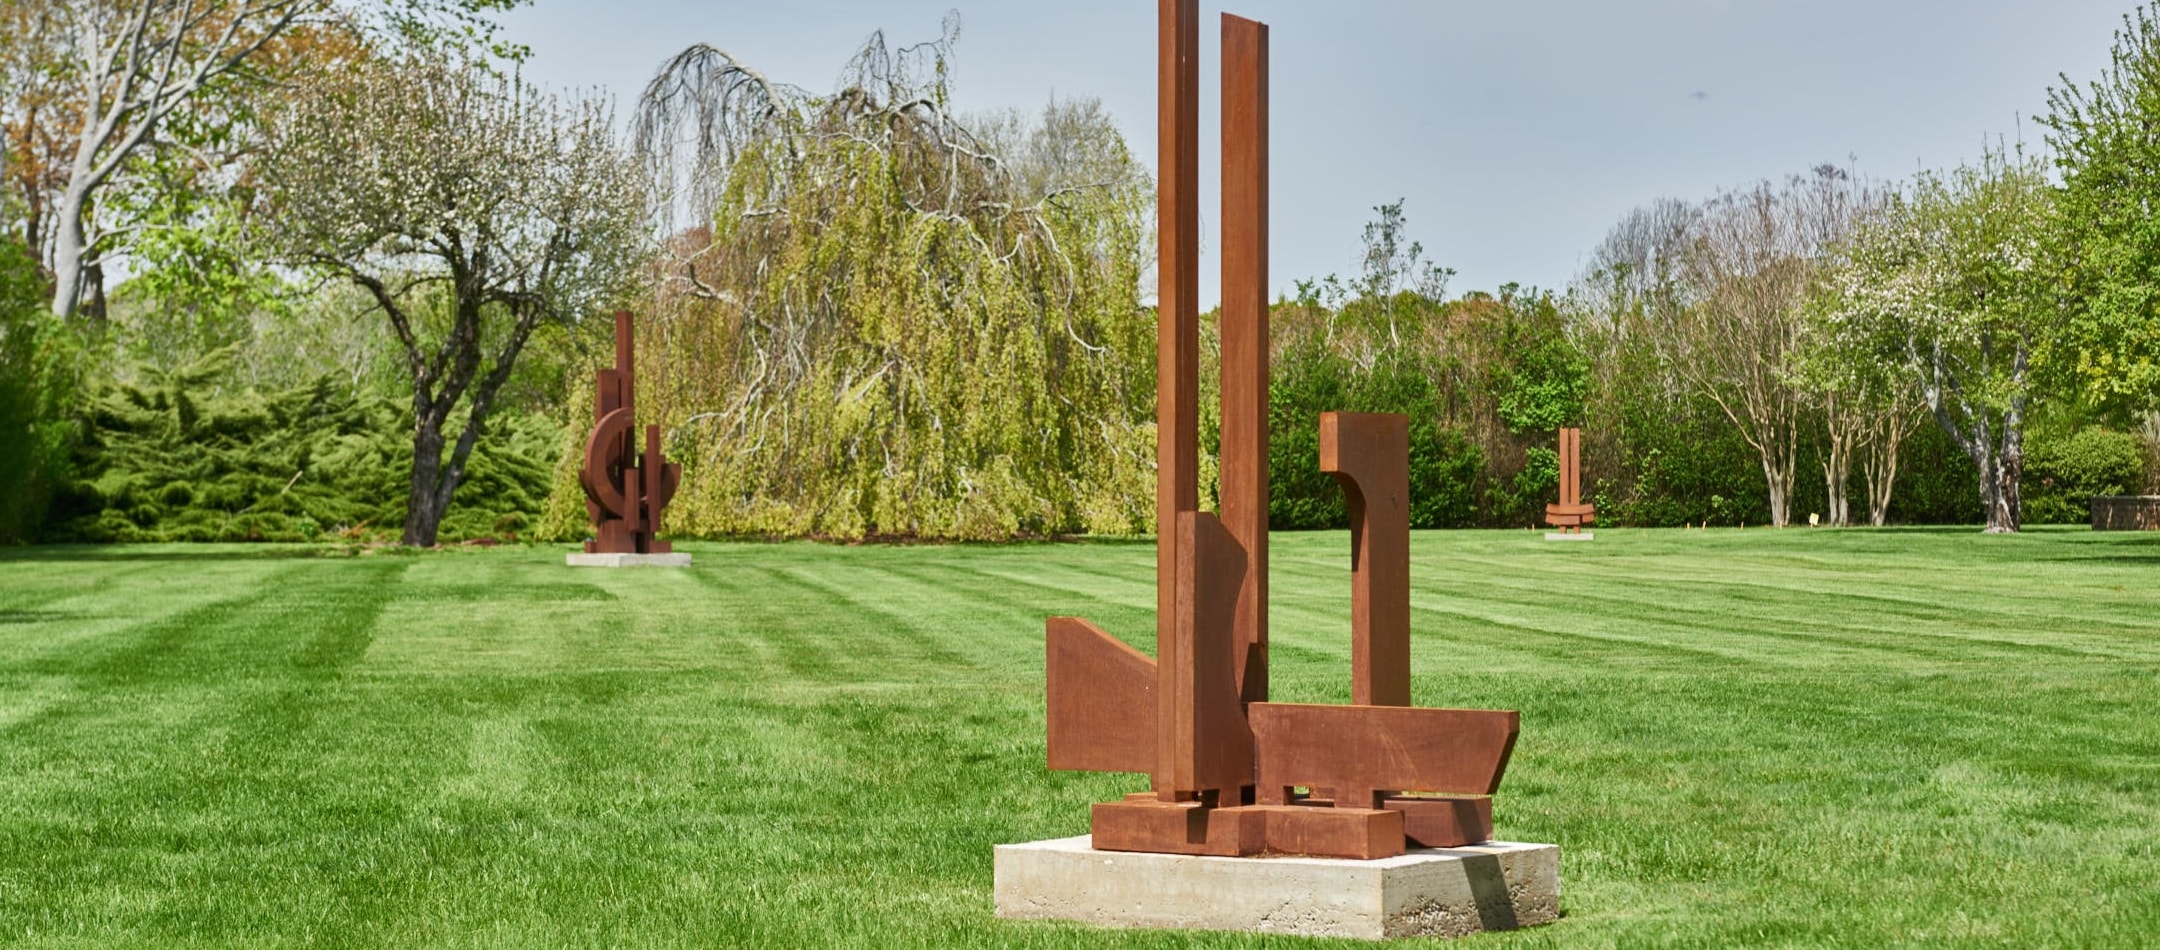 Large scale corten steel works&nbsp;on an estate in Southampton. Photo by Michael Mundy.